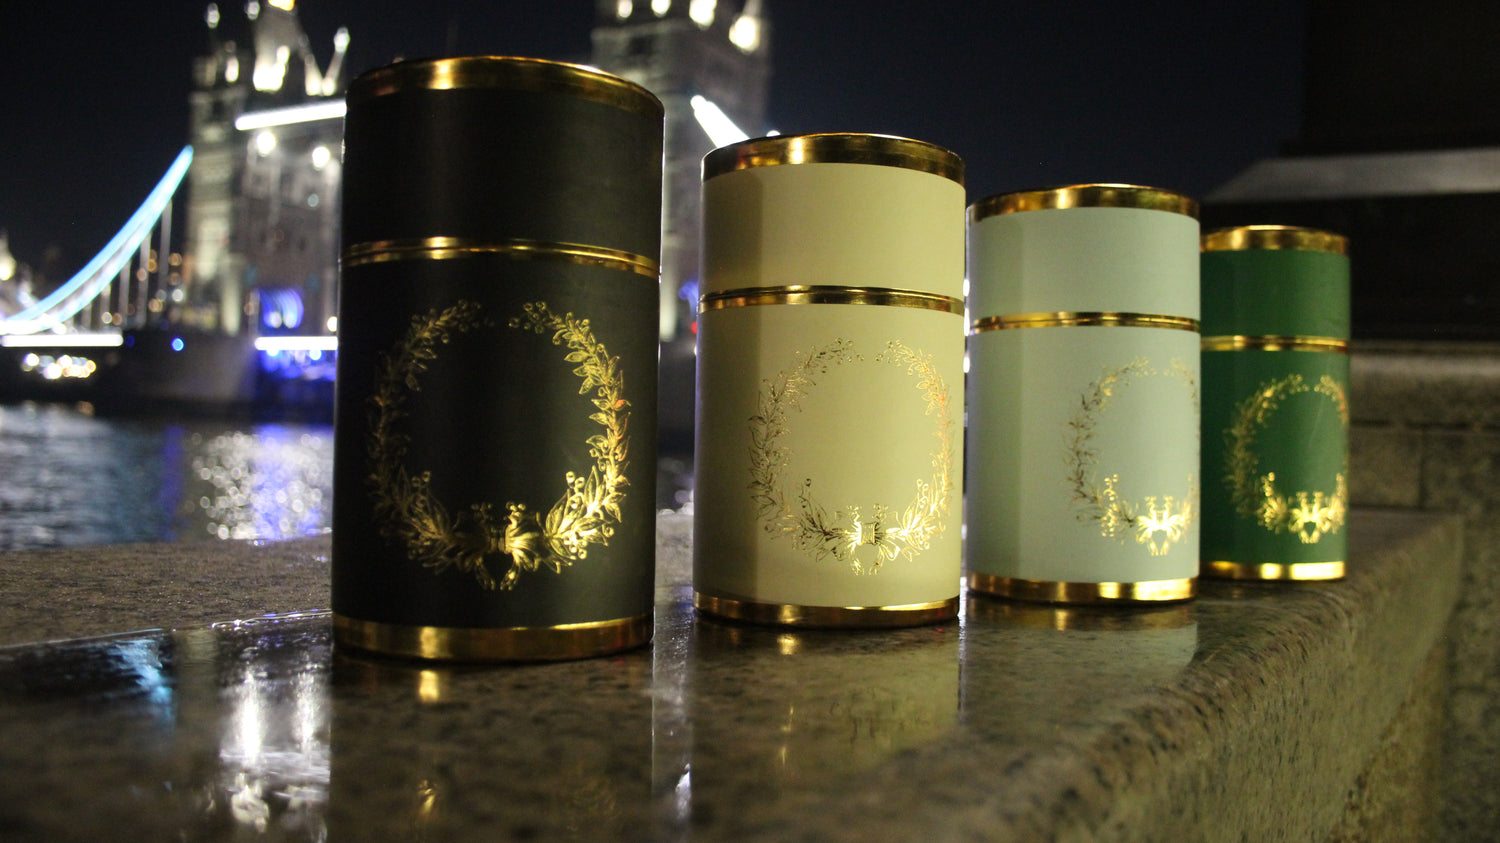 Beautiful islamic cylinder gift boxes with prayer mat and tasbih included. Perfect gift for ramadan and nikkah.